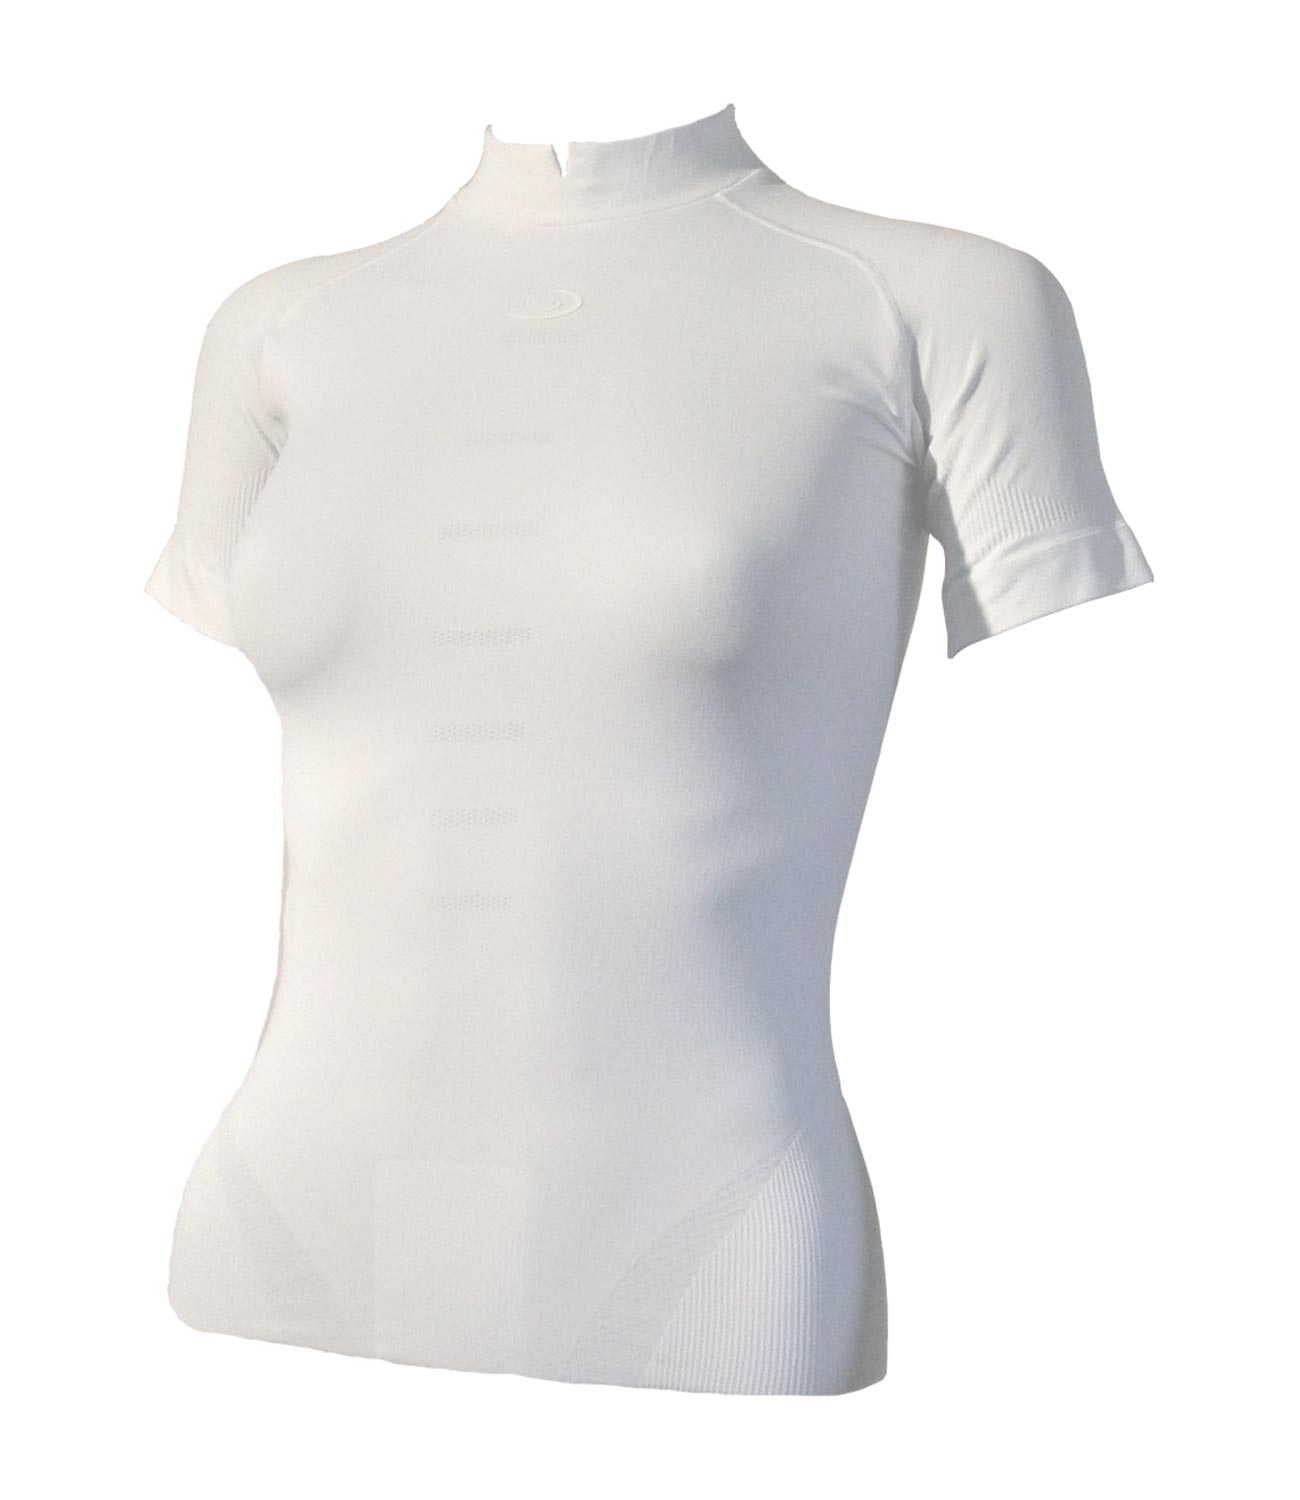 EastBay Women's Compression Shirt, White